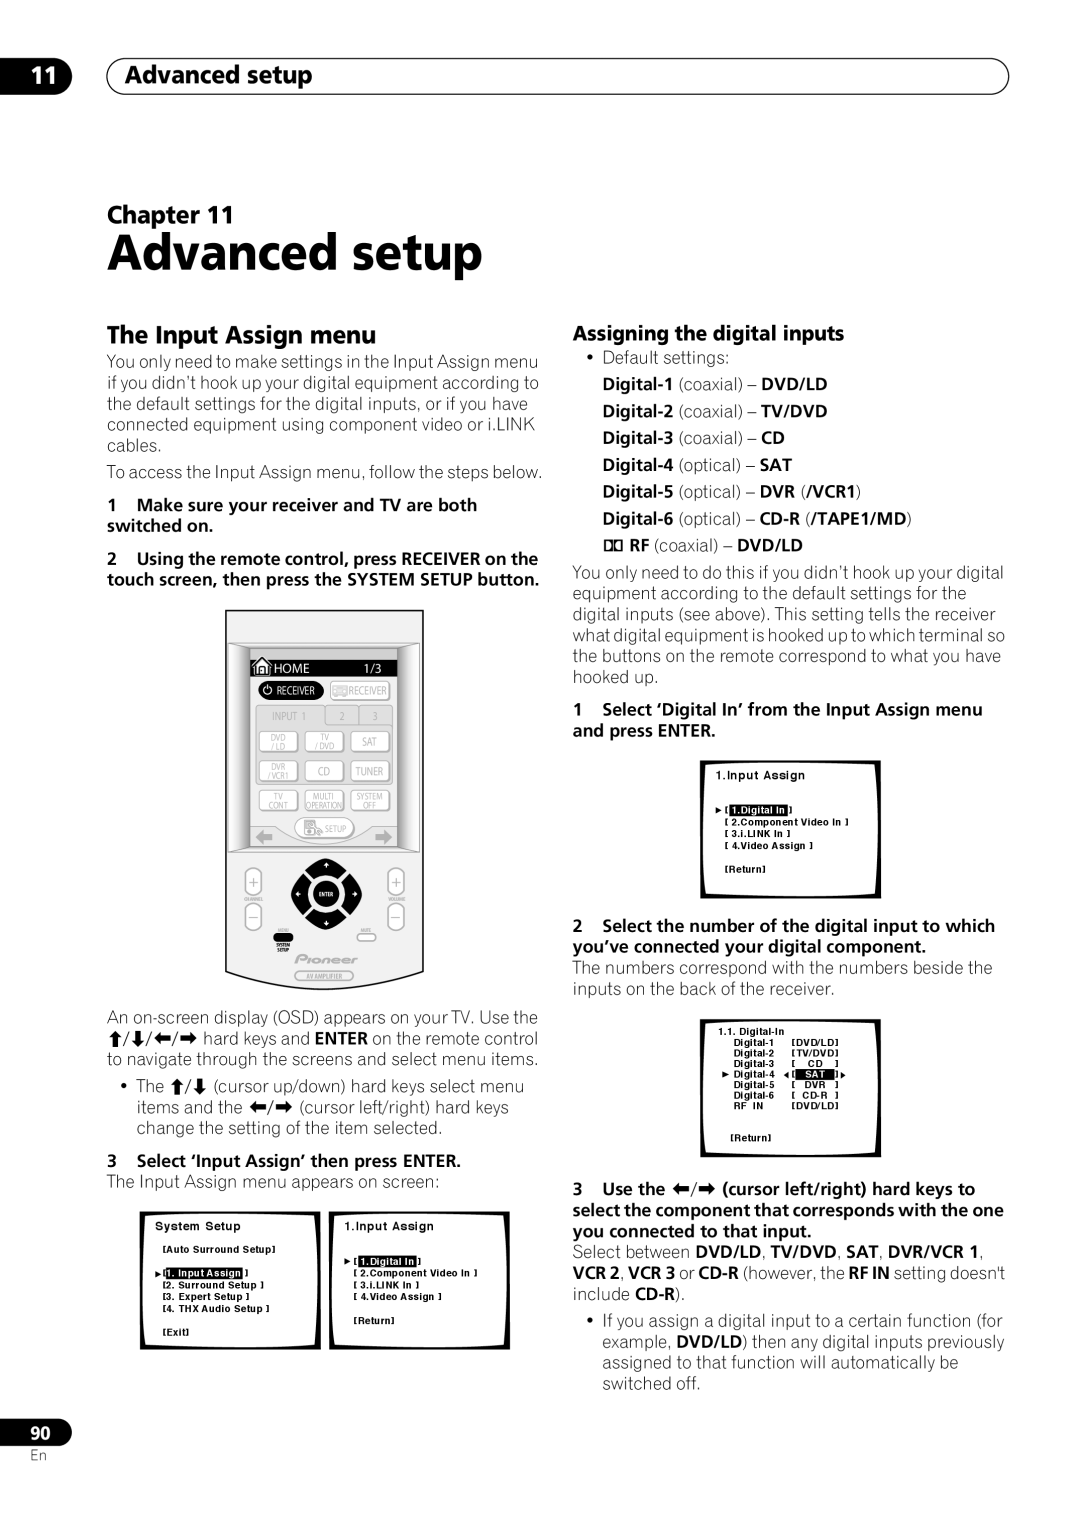 Pioneer VSX-59TXi operating instructions 11Advanced setup Chapter, The Input Assign menu, Assigning the digital inputs 